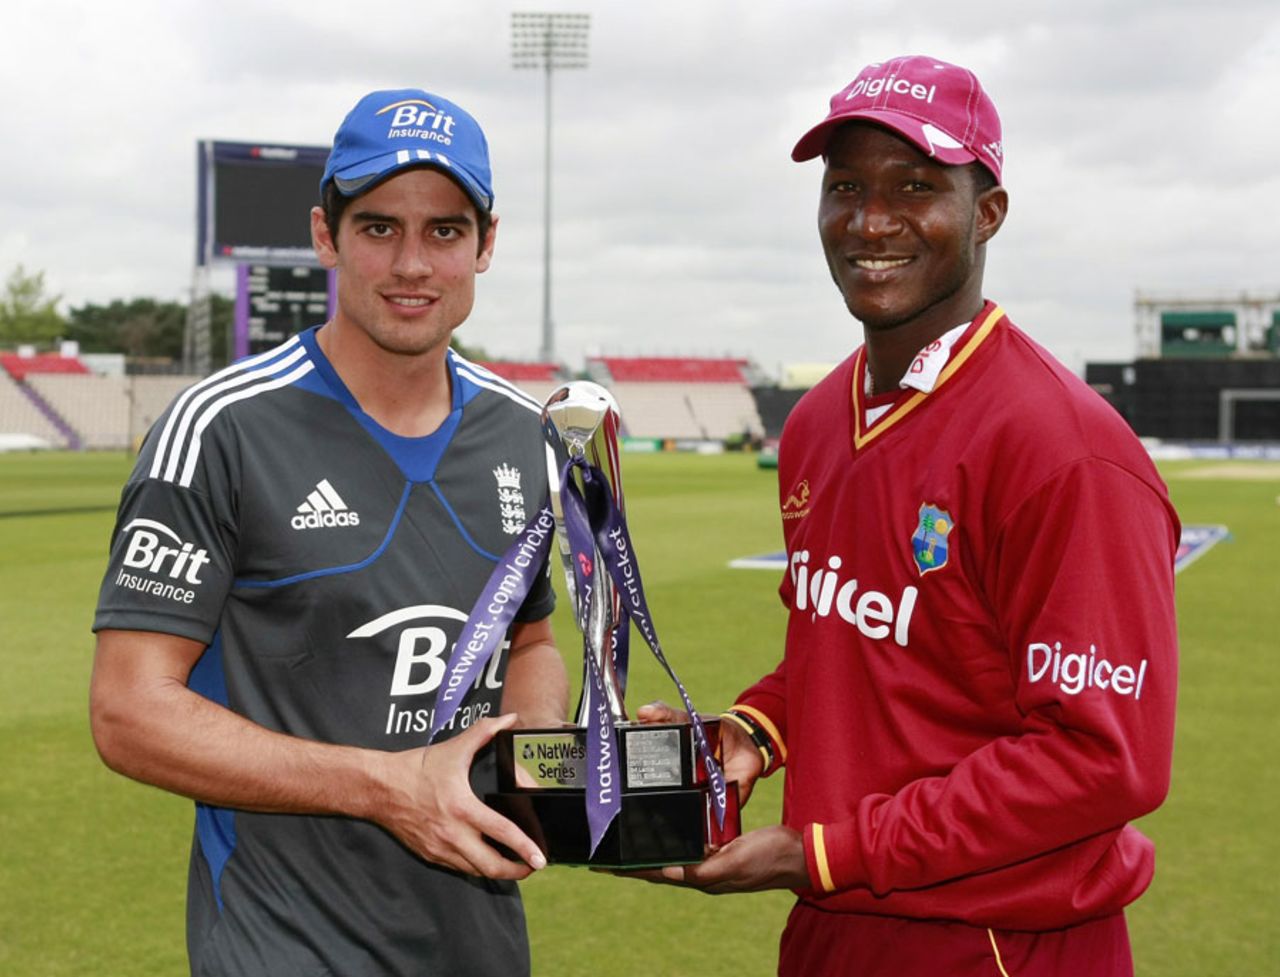 Captains Alastair Cook and Darren Sammy pose with the trophy ahead of the one-day series between England and West Indies, West End, June 15, 2012